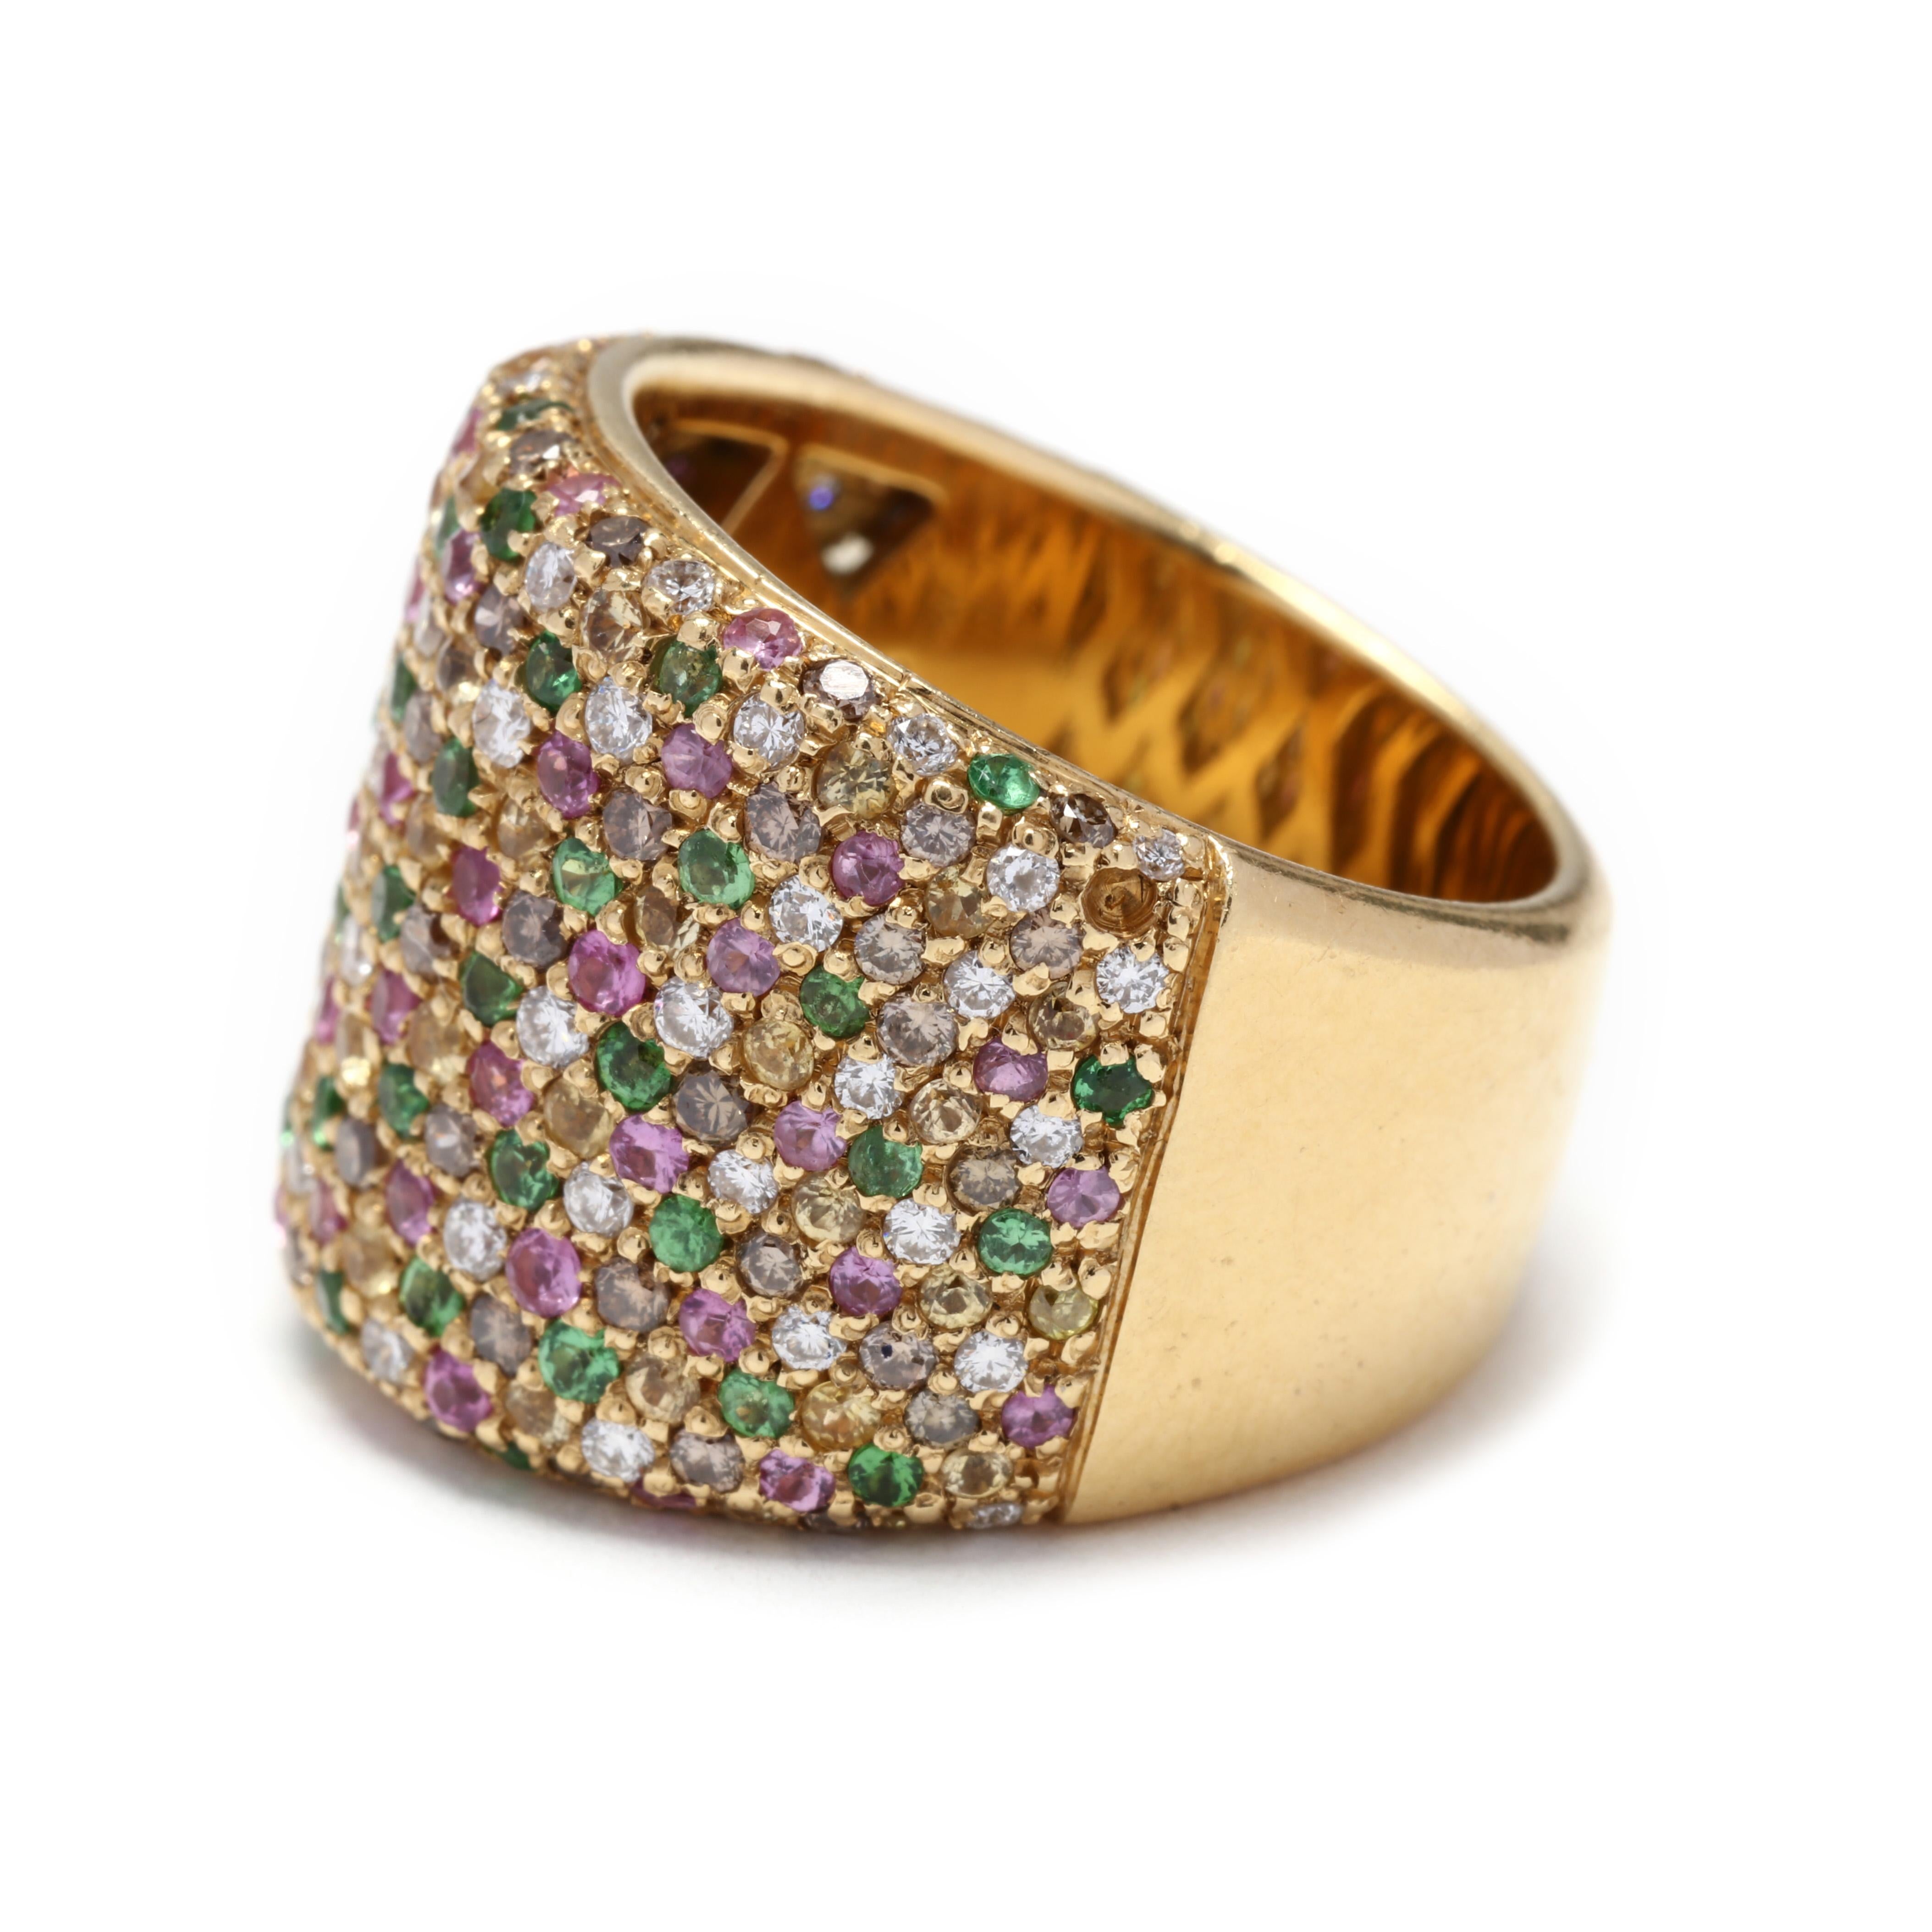 18K Wide Pave Diamond, Pink Sapphire, Tsavorite Garnet & More Band Ring In Good Condition For Sale In McLeansville, NC